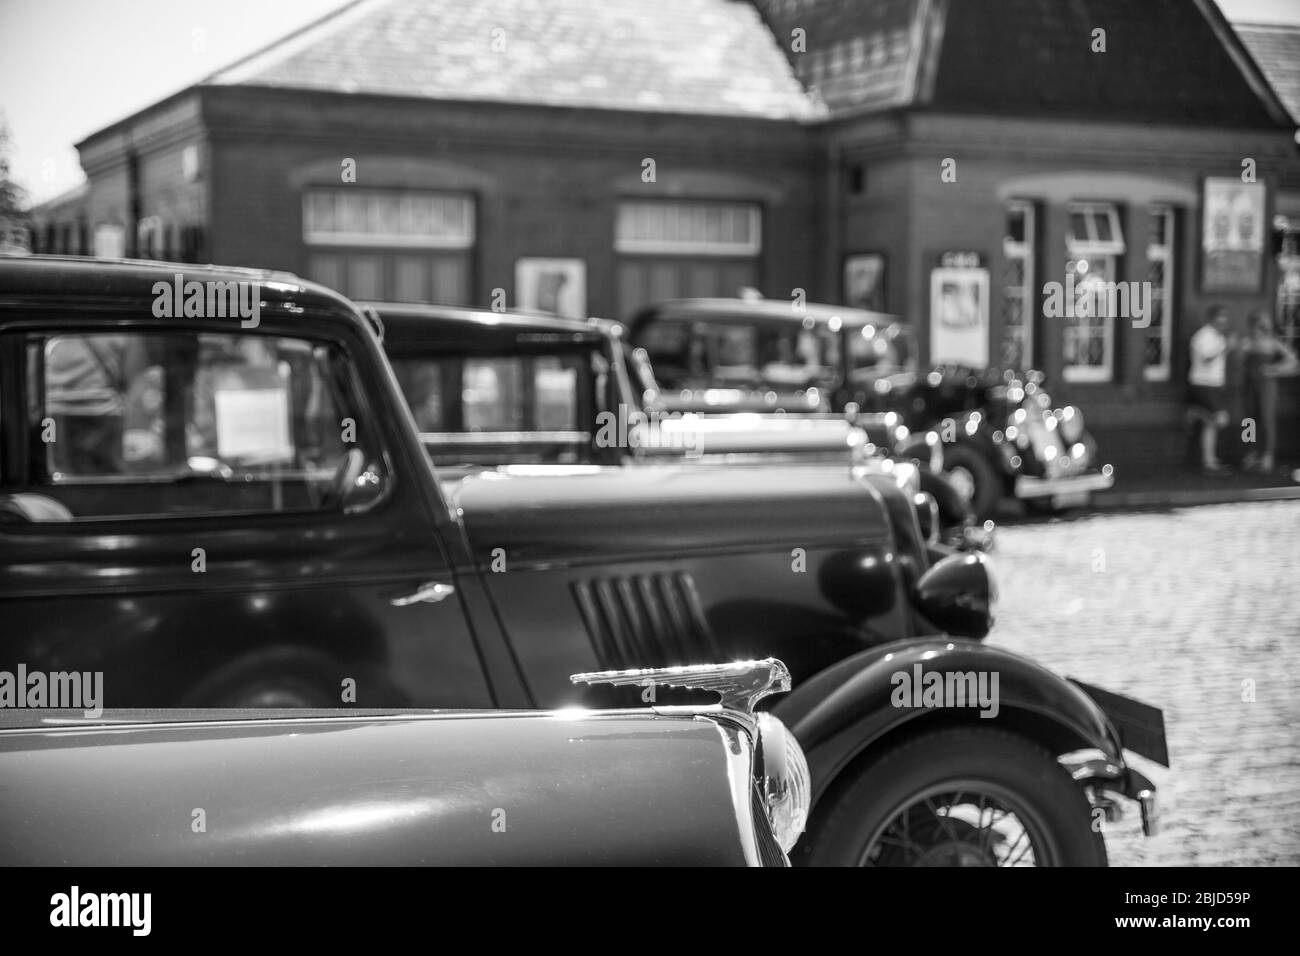 Monochrome side view of 1940s vintage classic motor cars parked in summer sunshine, Severn Valley Railway Kidderminster heritage railway station, UK. Stock Photo